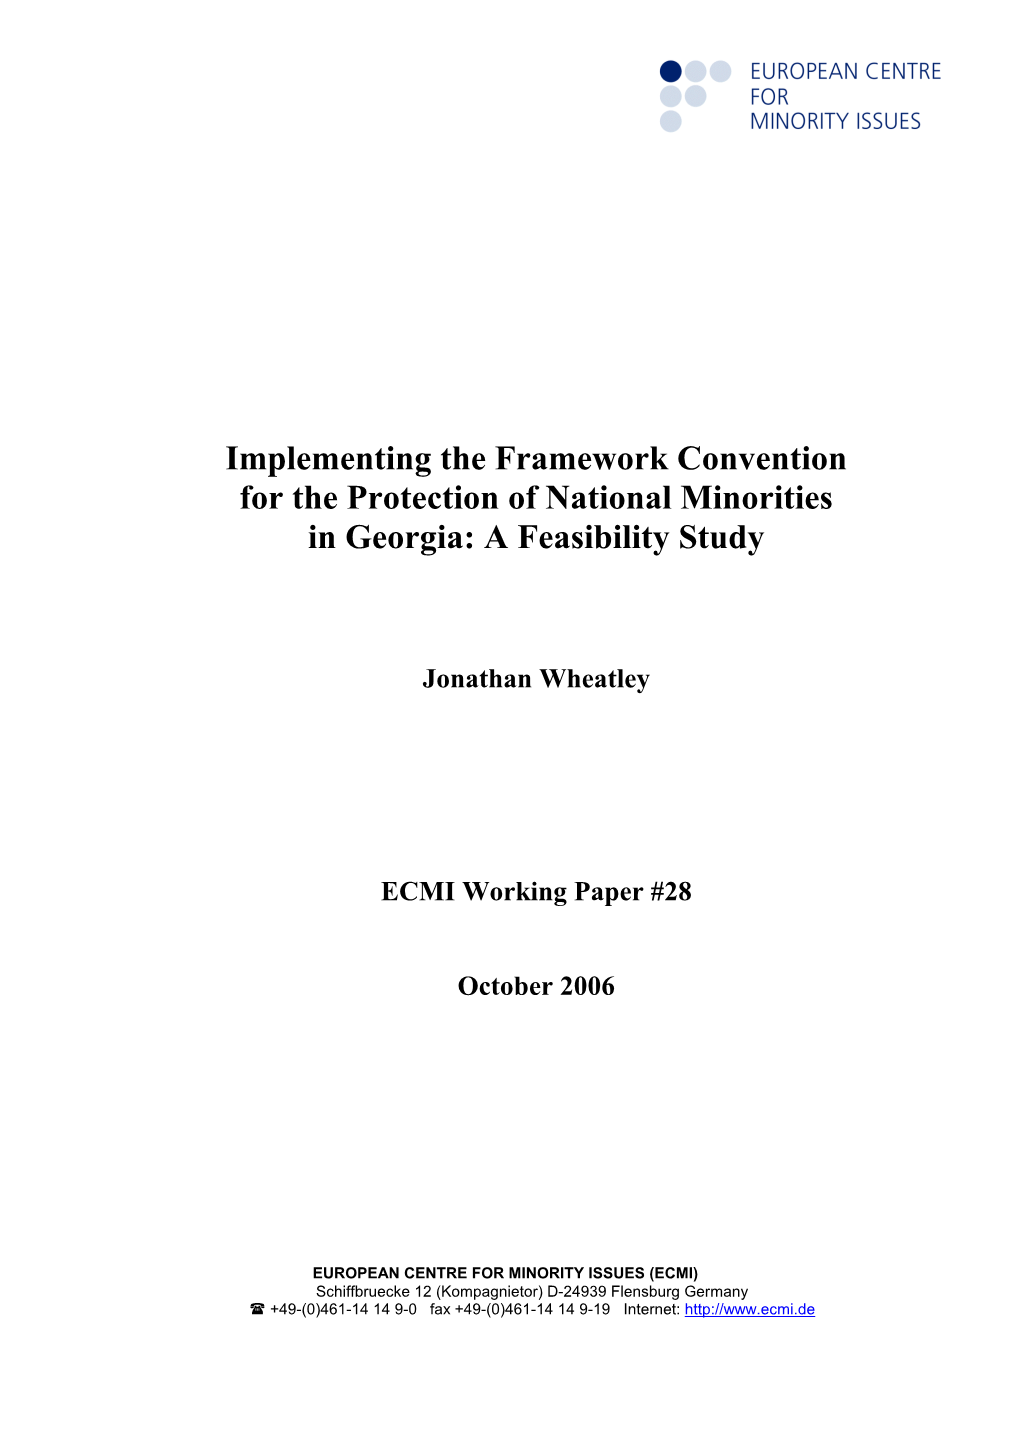 Implementing the Framework Convention for the Protection of National Minorities in Georgia: a Feasibility Study